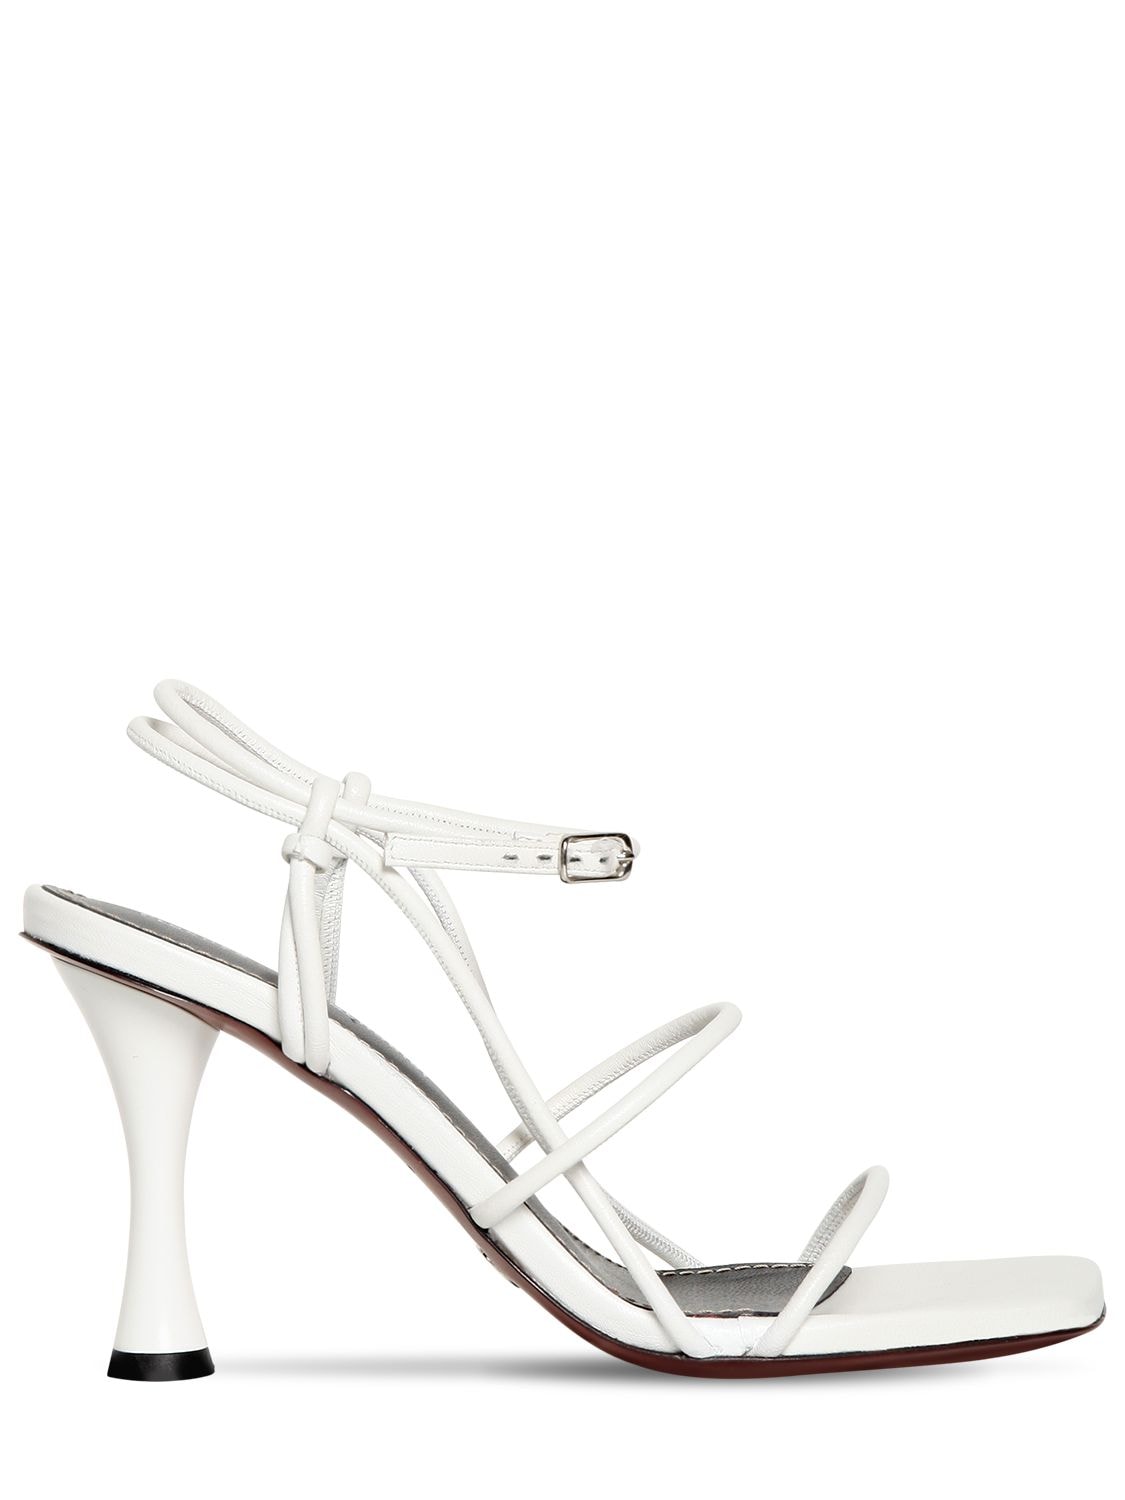 white leather strap sandals